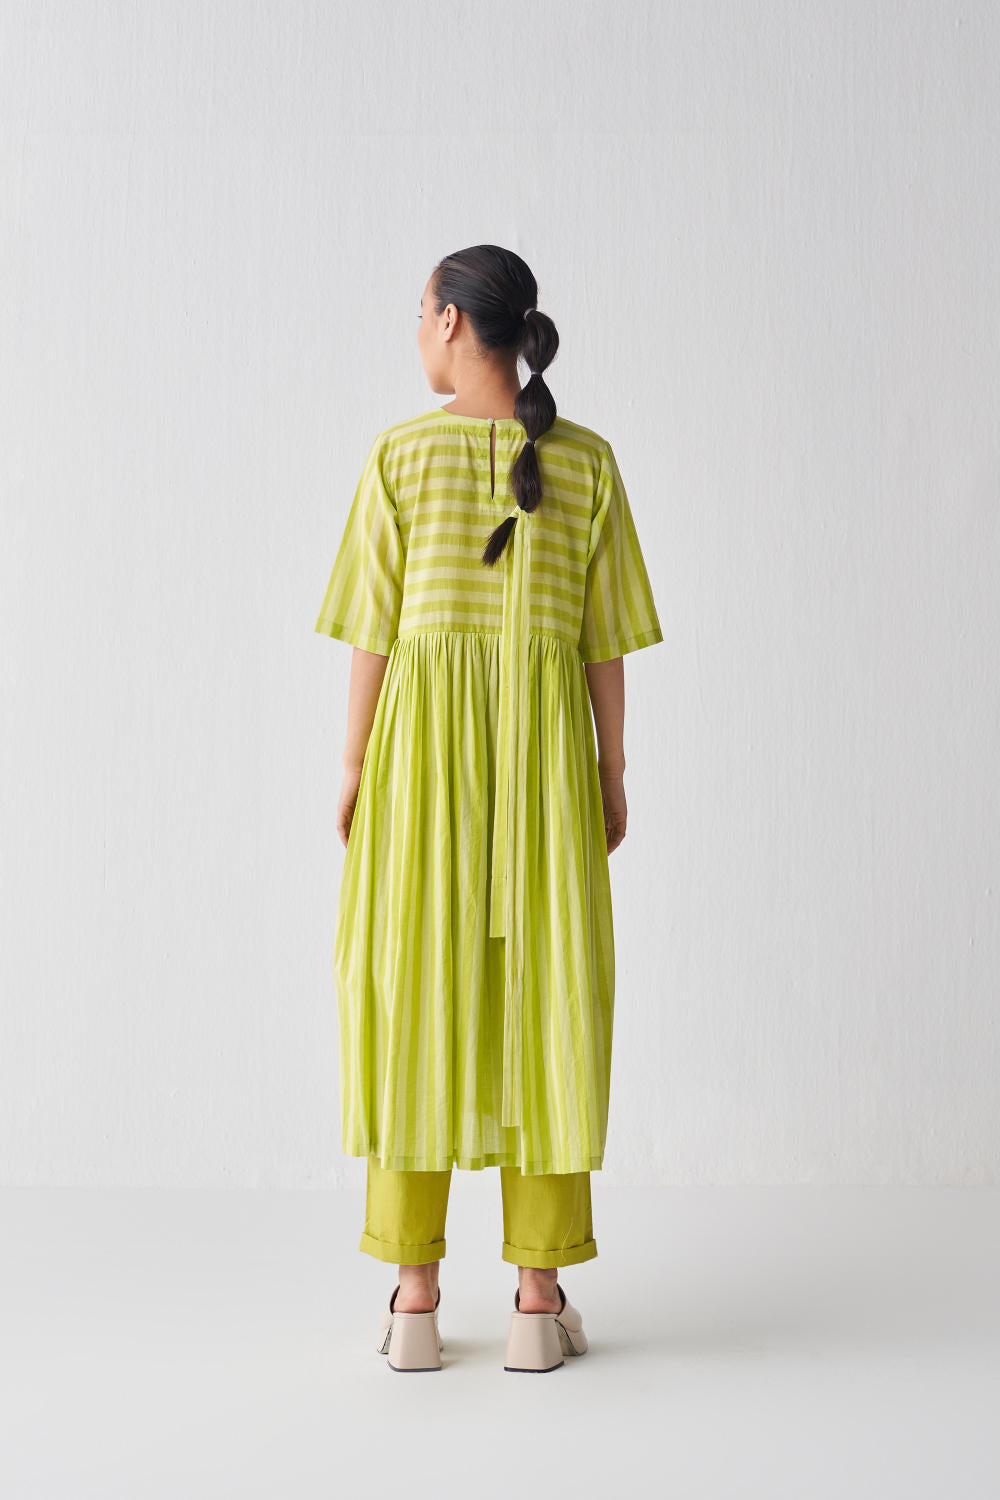 SIDE GATHER DRESS CO-ORD